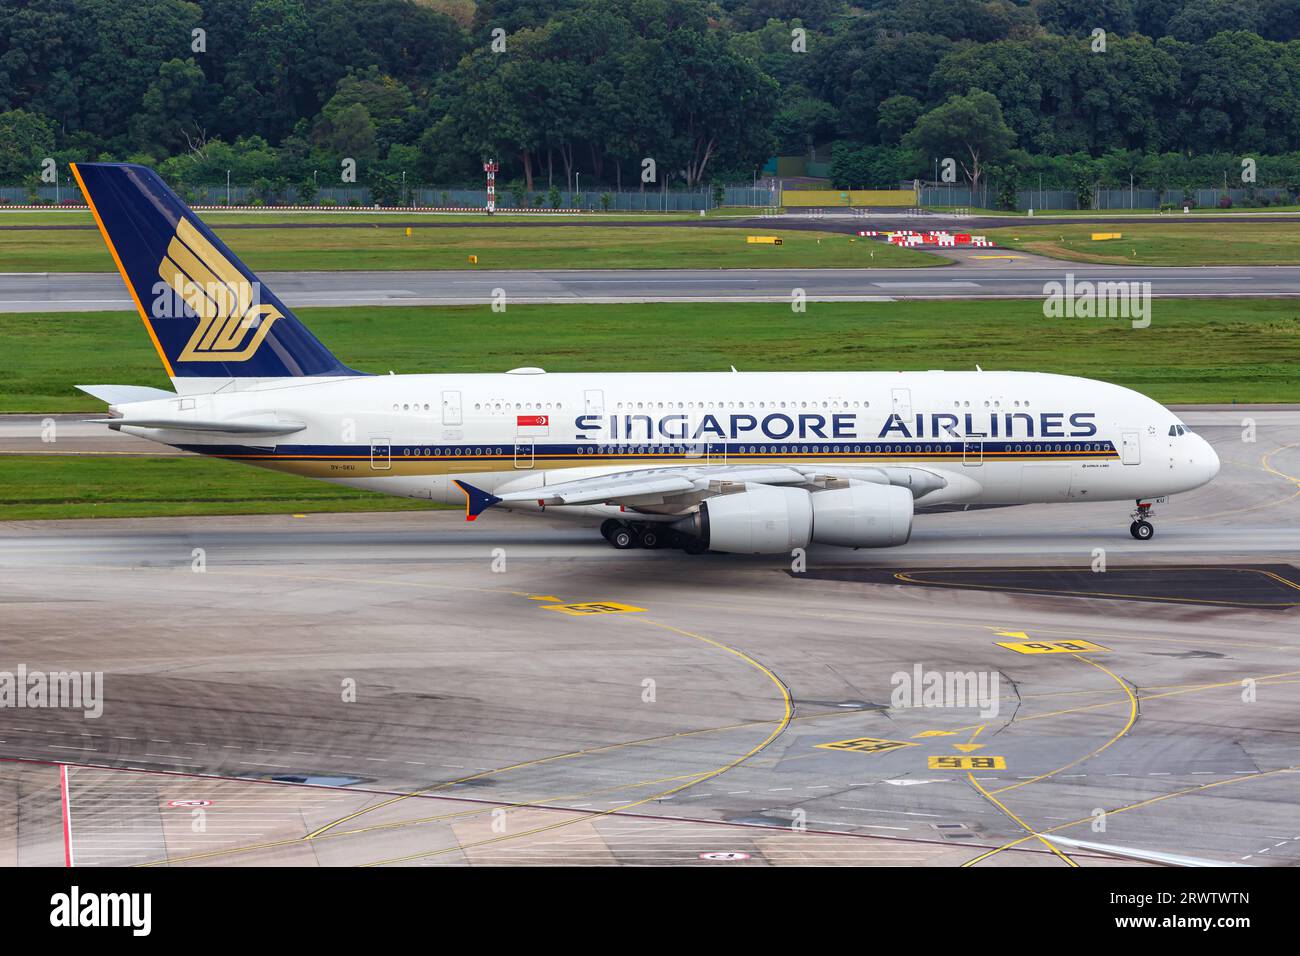 Changi, Singapore - February 3, 2023: Singapore Airlines Airbus A380-800 airplane at Changi Airport in Singapore. Stock Photo